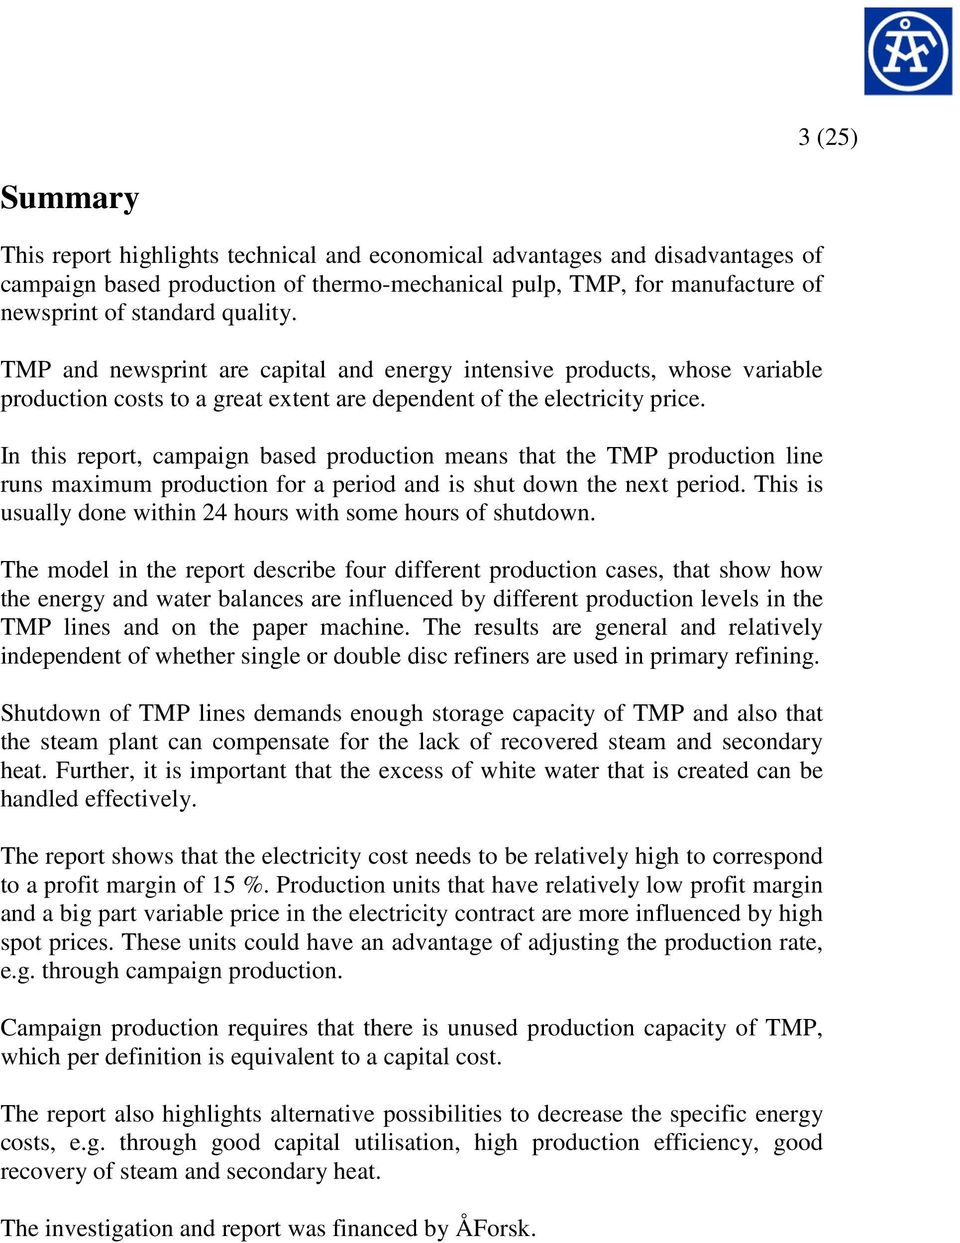 In this report, campaign based production means that the TMP production line runs maximum production for a period and is shut down the next period.